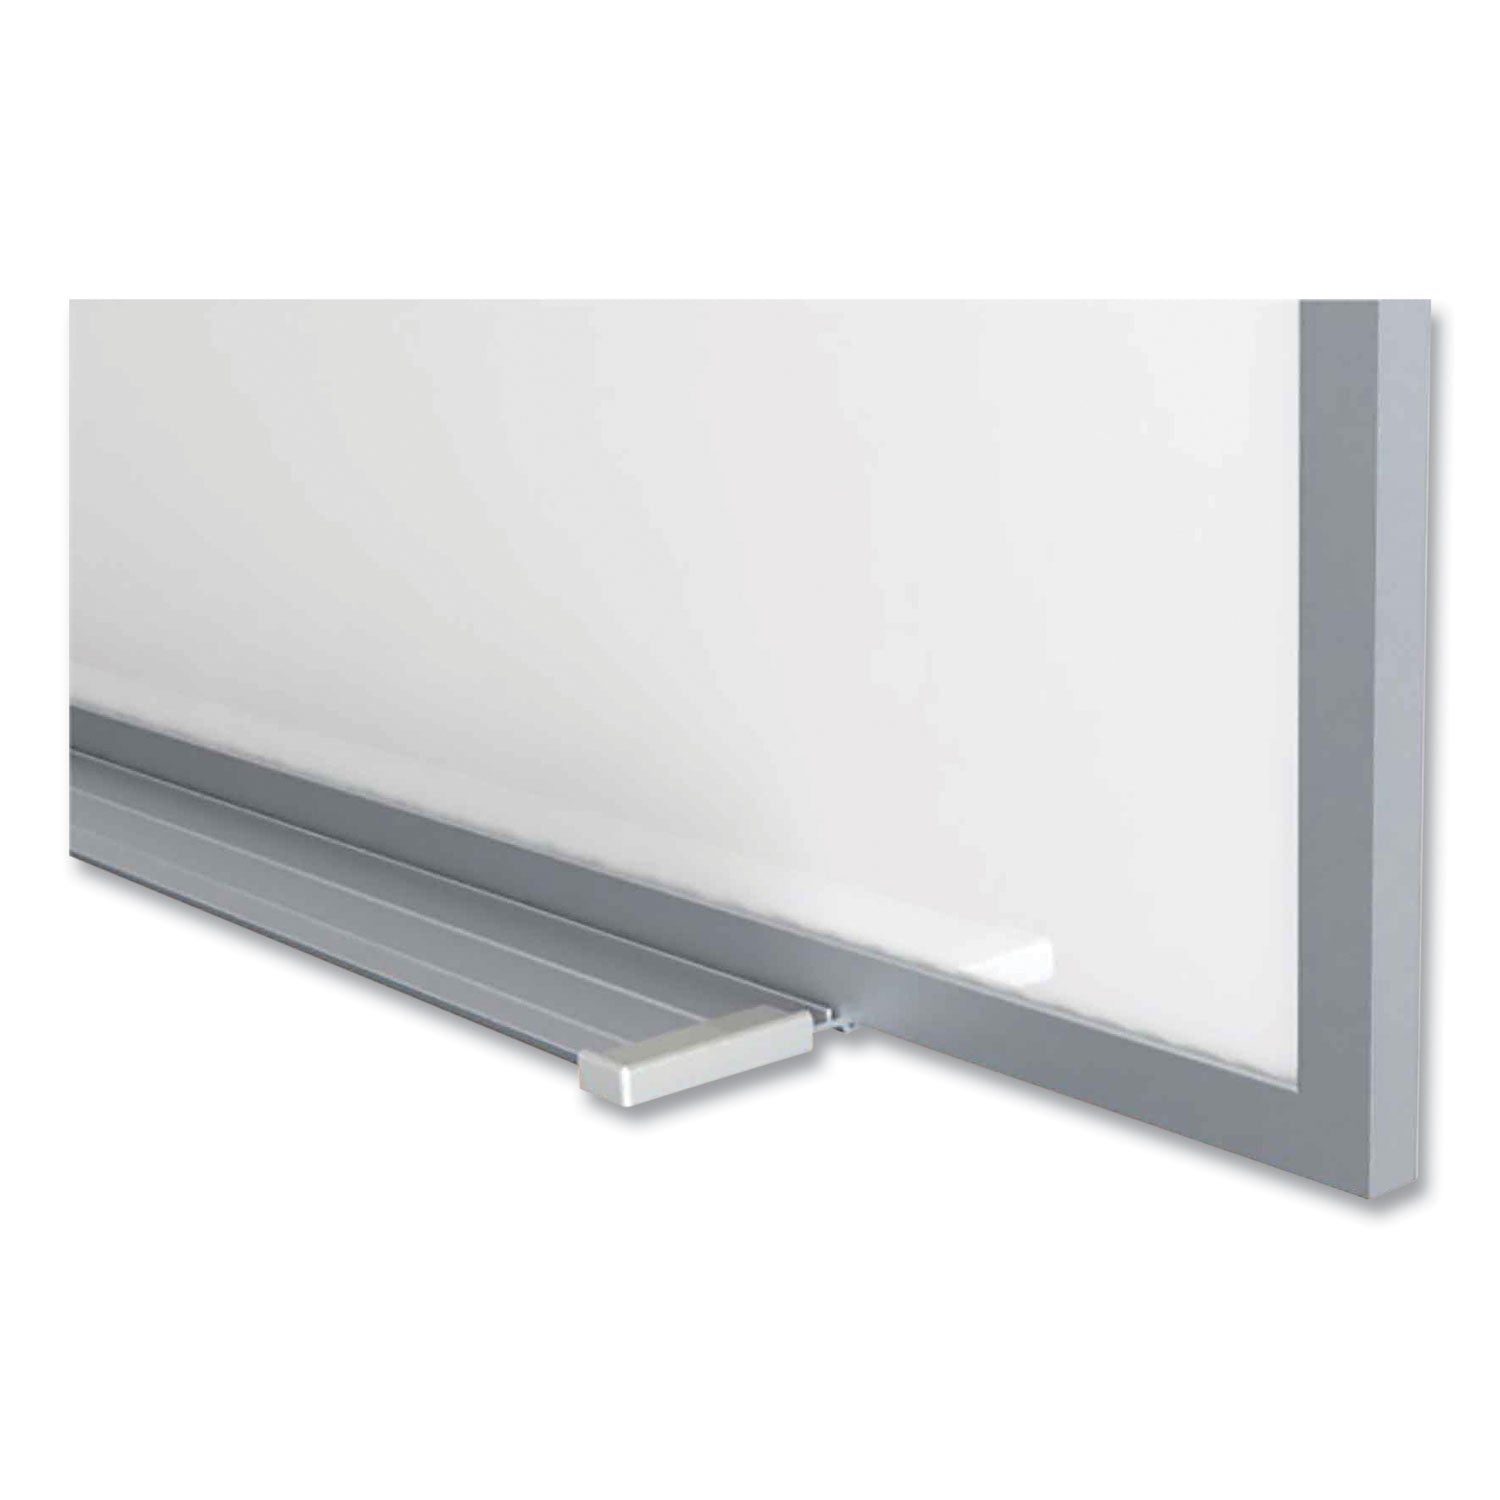 magnetic-porcelain-whiteboard-with-satin-aluminum-frame-and-map-rail-14459-x-6047-white-surface-ships-in-7-10-bus-days_ghem1p5121m - 2